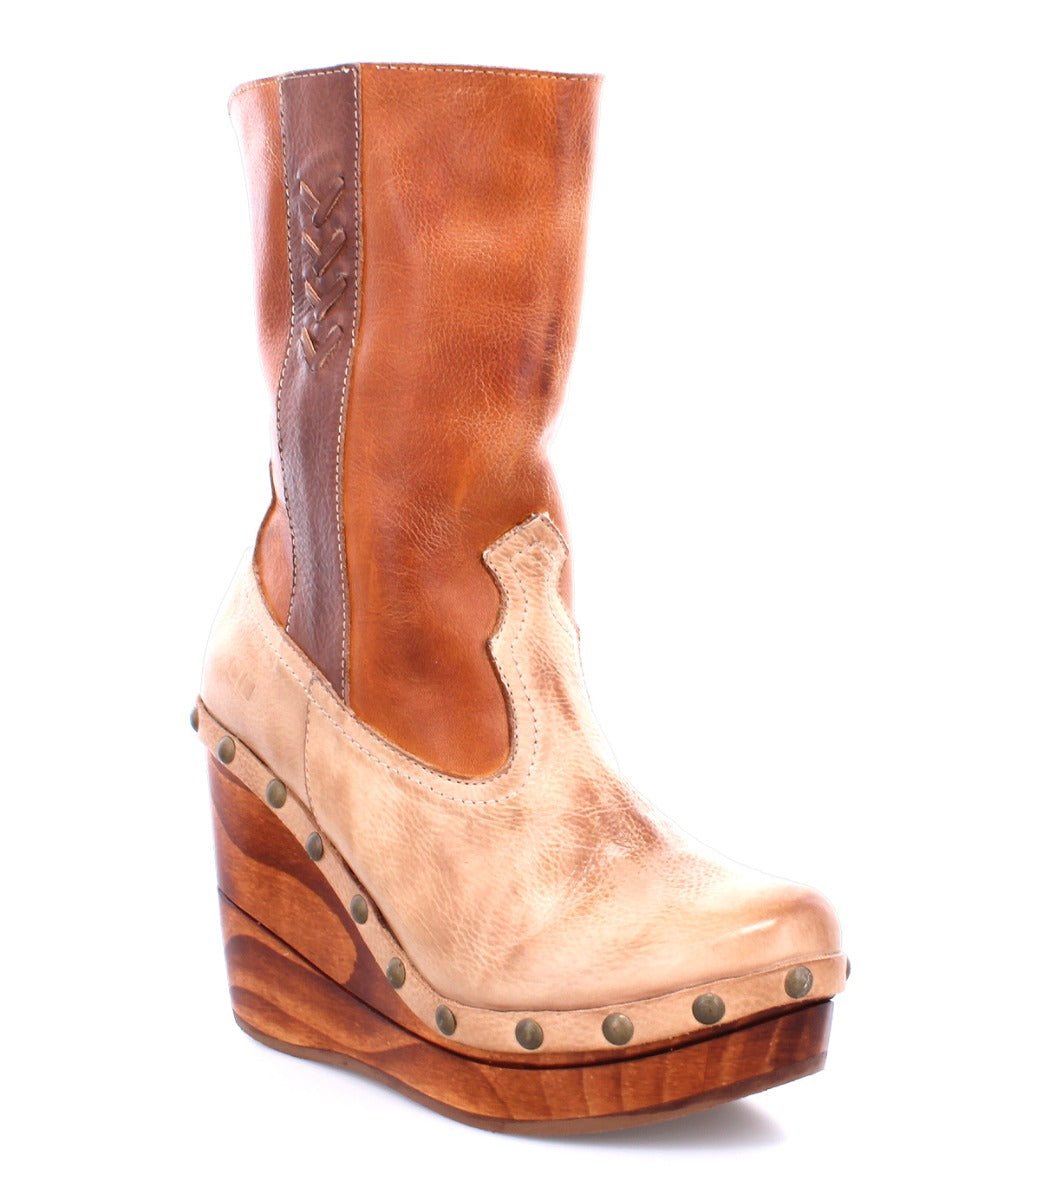 A women's Macarena wedge boot with a wooden platform. (Brand: Bed Stu)